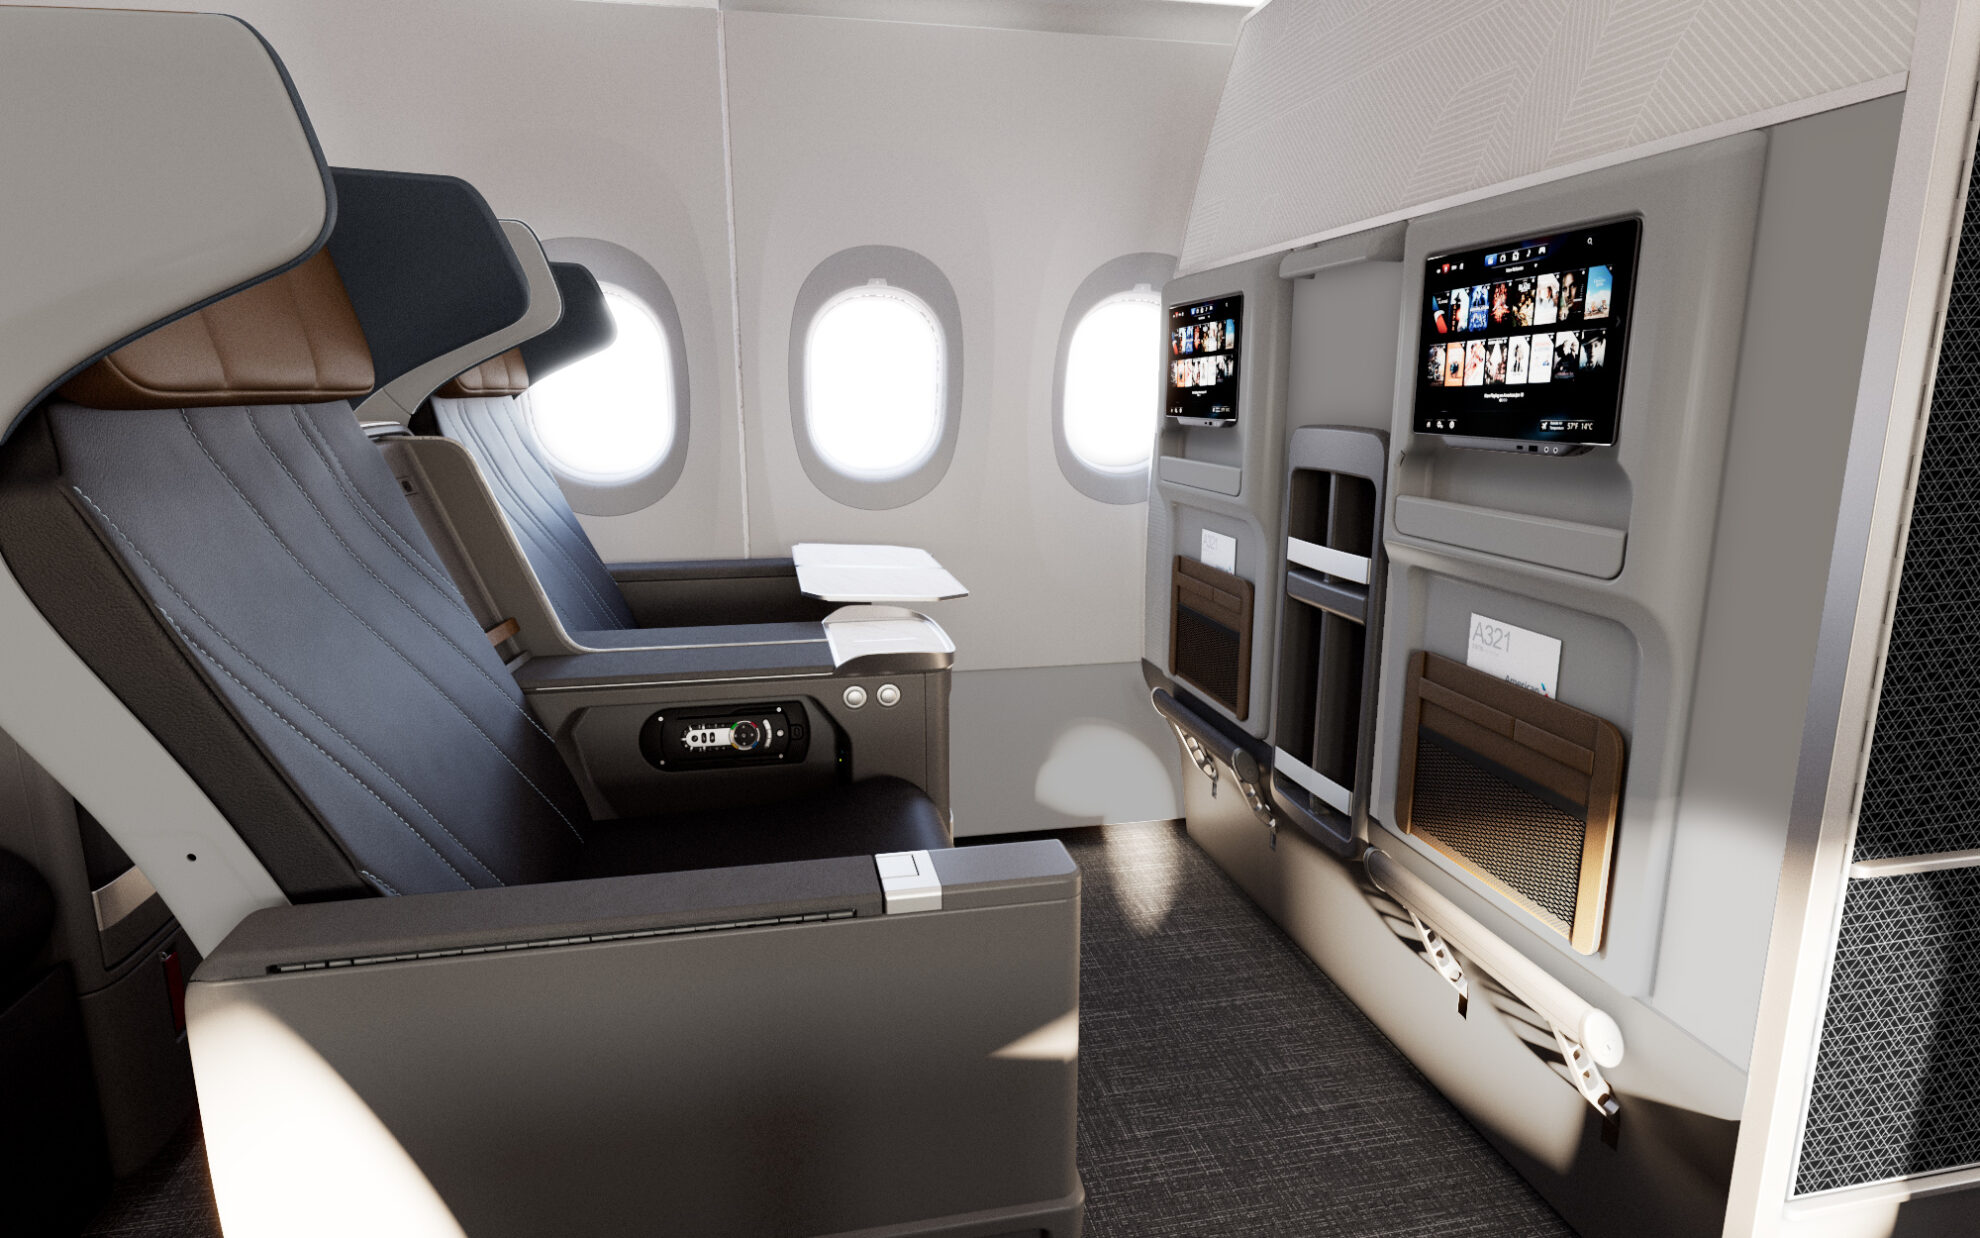 Suite Unggulan American Airlines A321